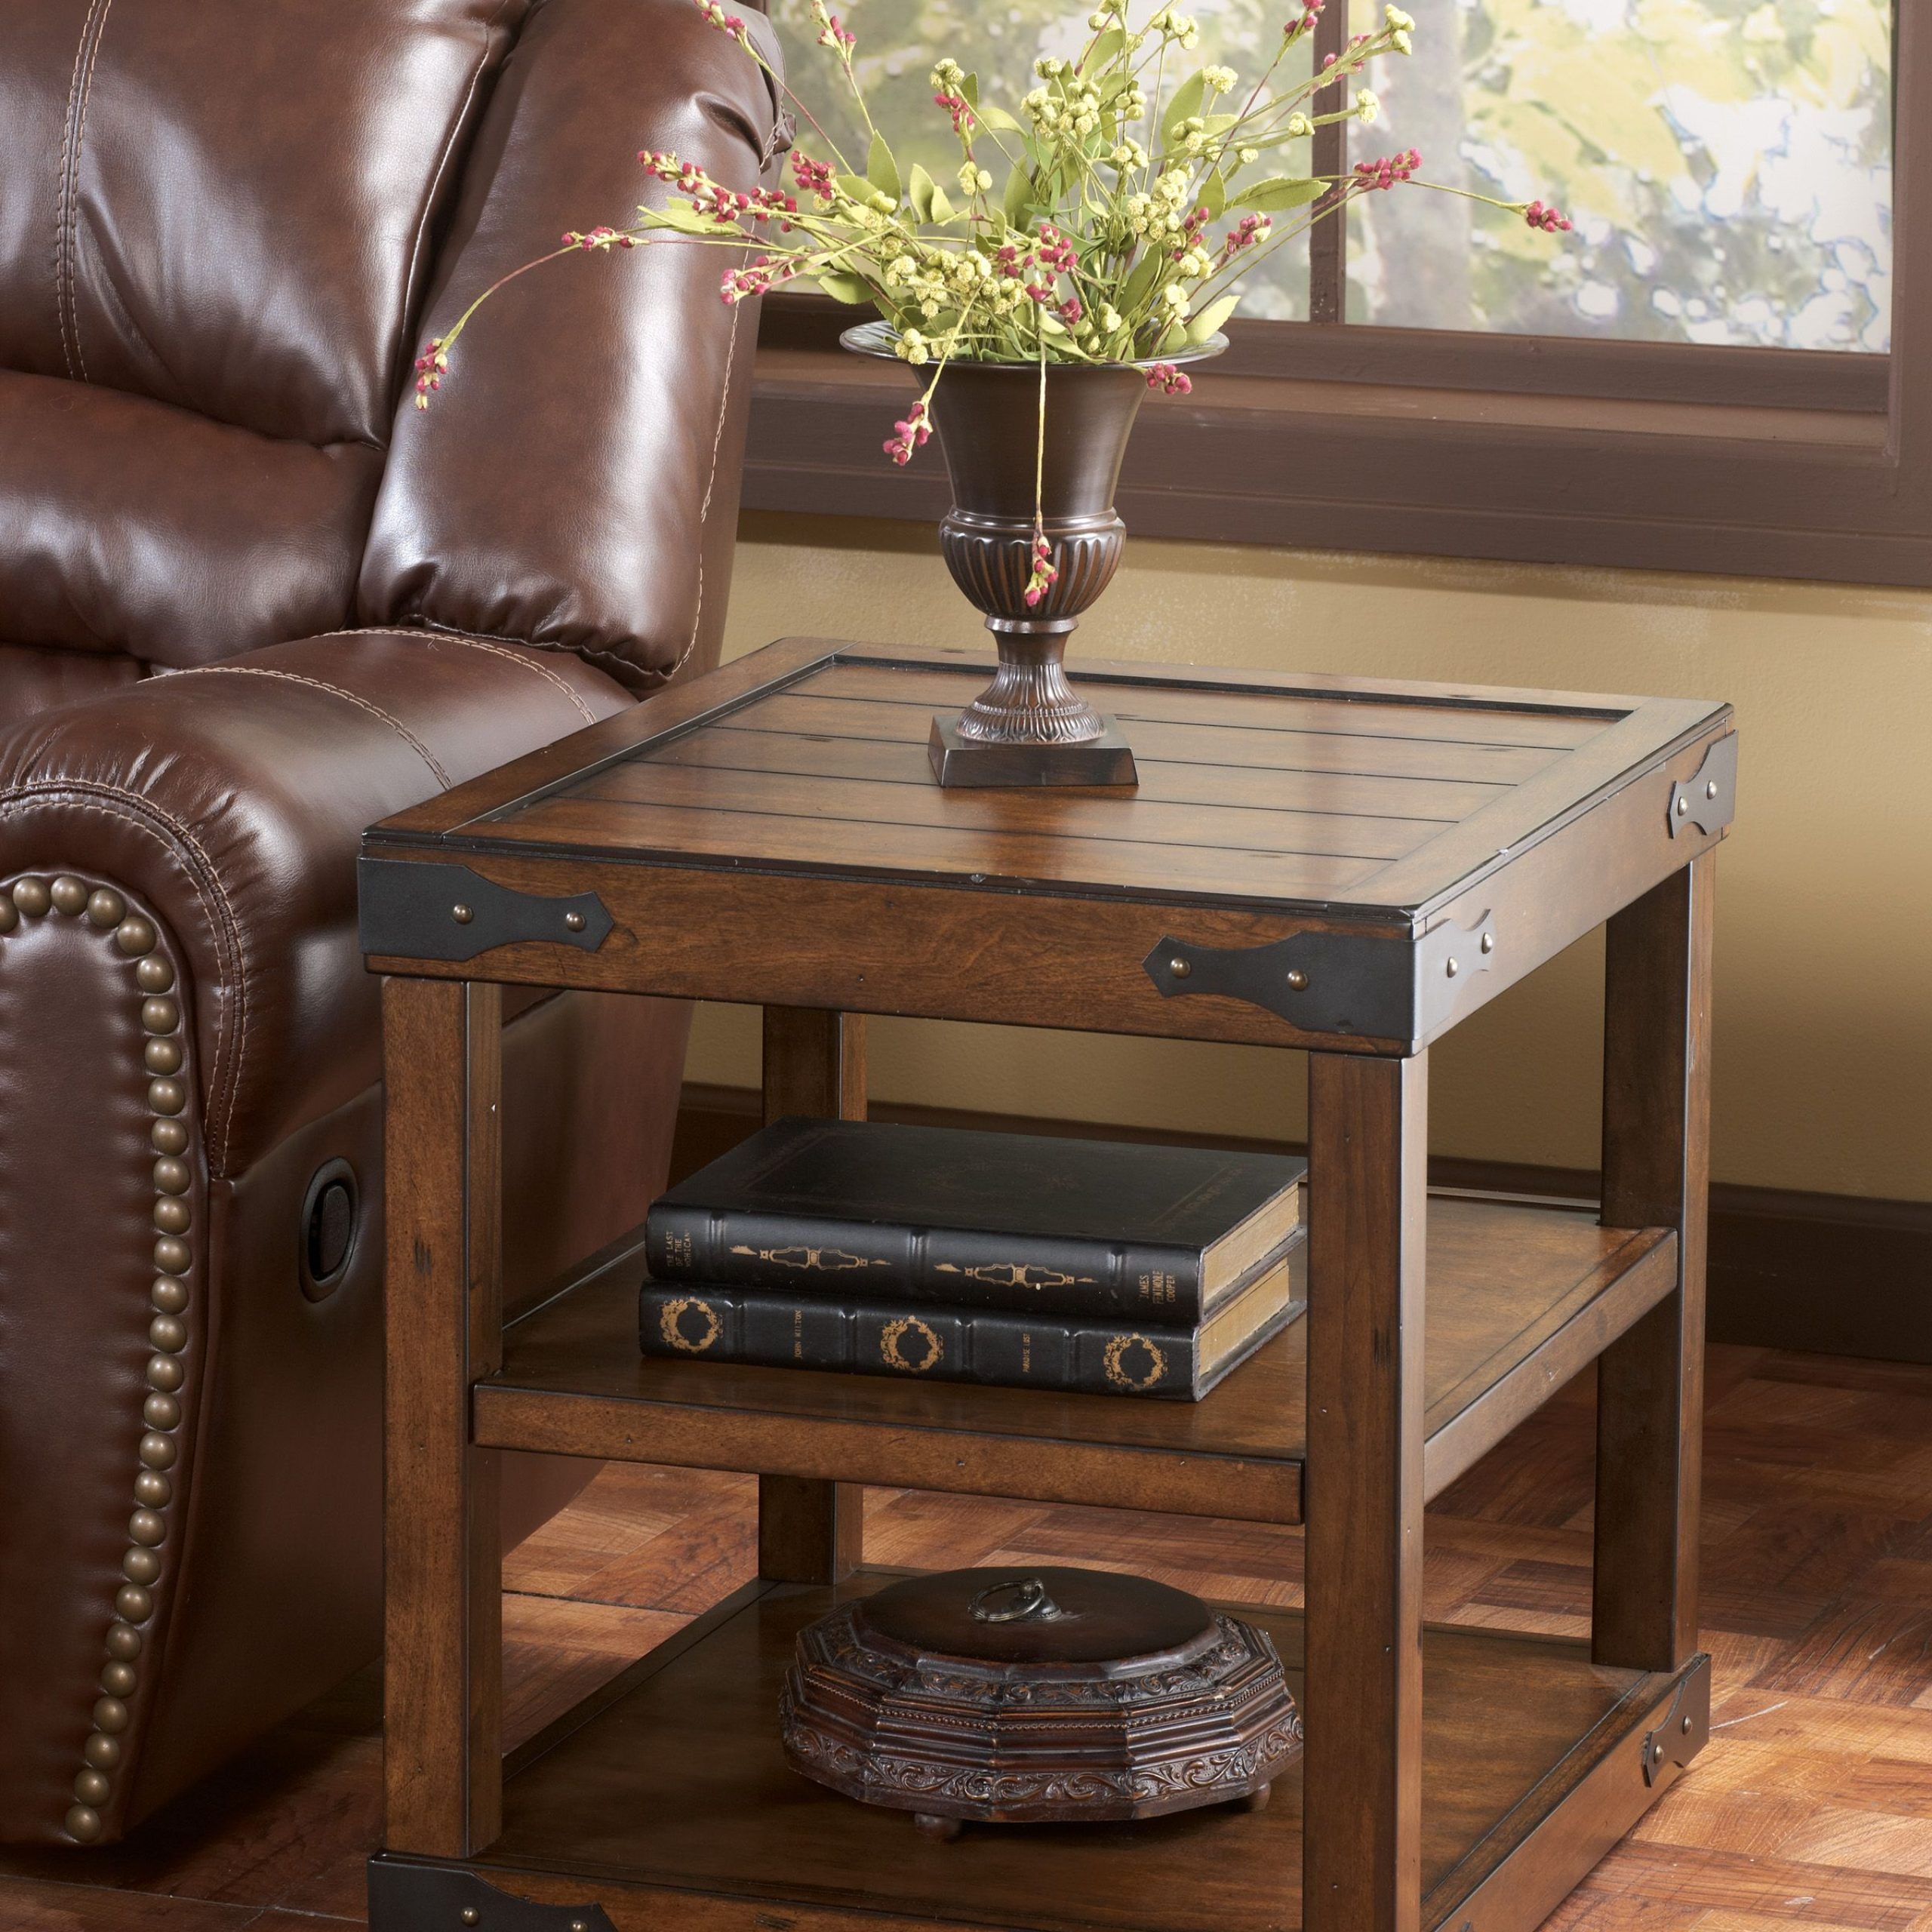 Shepherdsville Traditional Brown Wood Coffee Table Set | Rustic End Intended For Brown Rustic Coffee Tables (View 18 of 20)